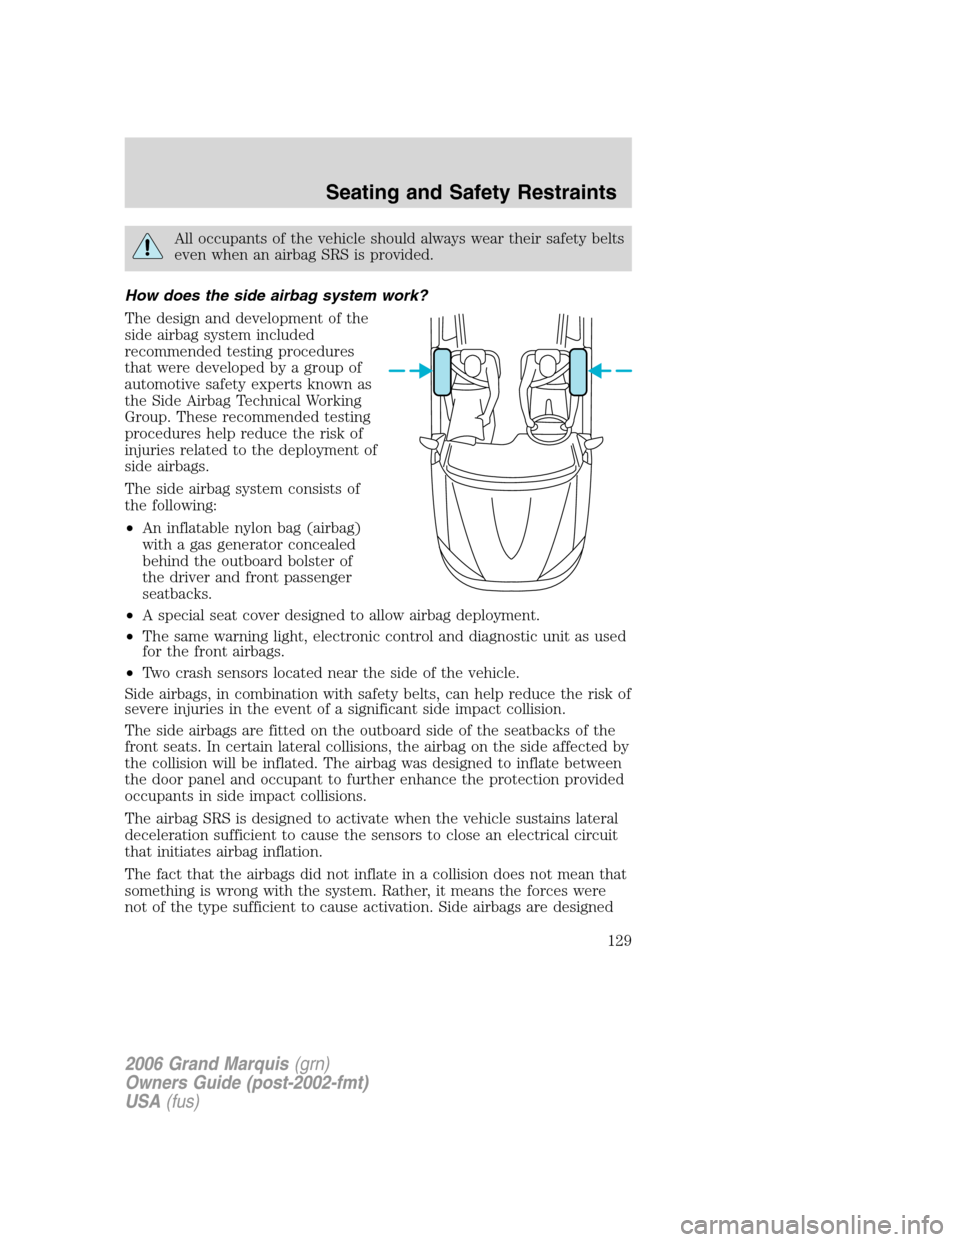 Mercury Grand Marquis 2006  Owners Manuals All occupants of the vehicle should always wear their safety belts
even when an airbag SRS is provided.
How does the side airbag system work?
The design and development of the
side airbag system inclu